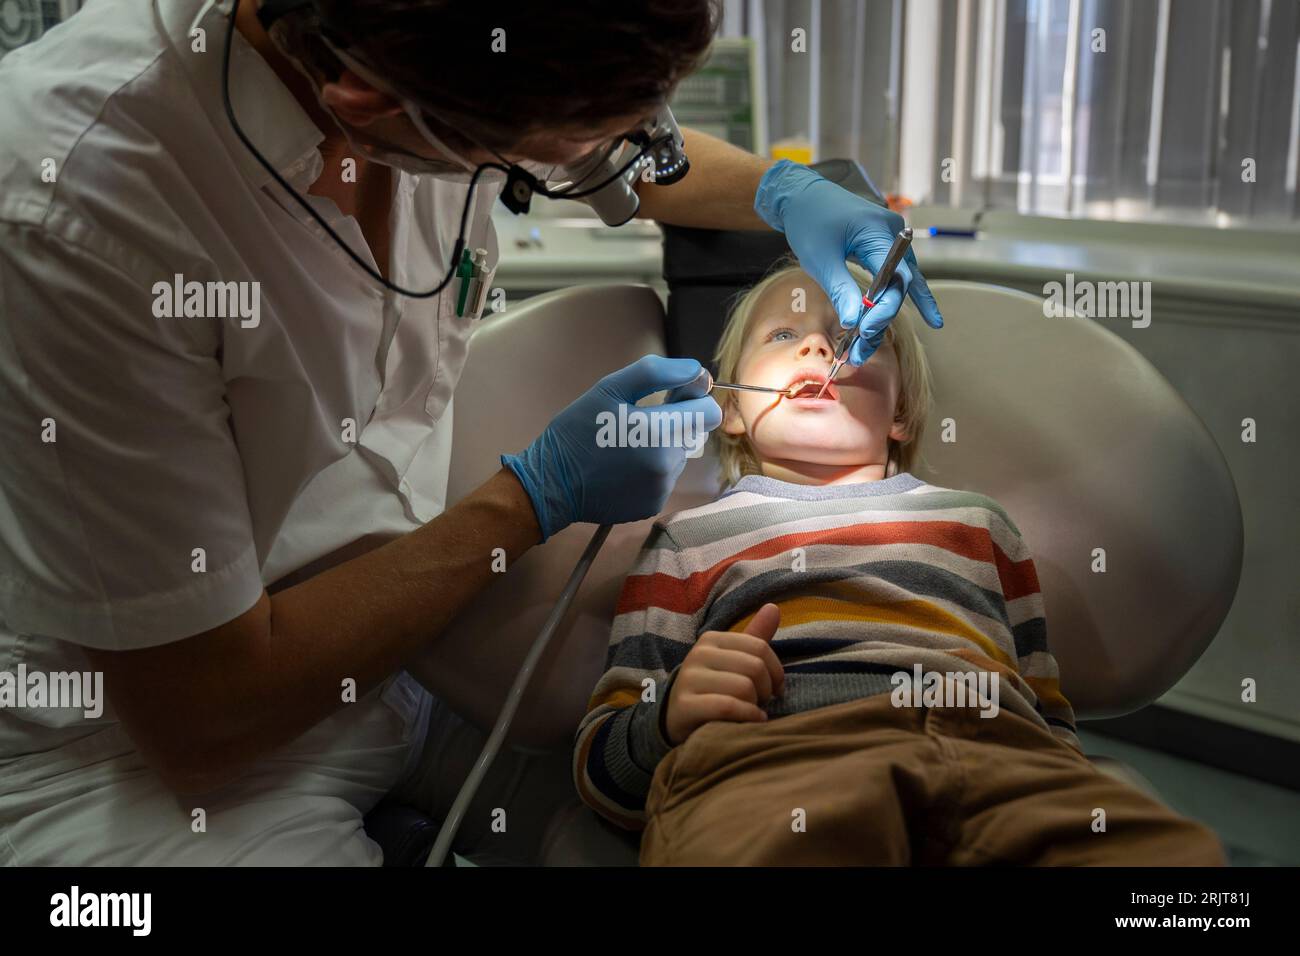 Dentist examining patient's teeth with dental equipment at clinic Stock Photo